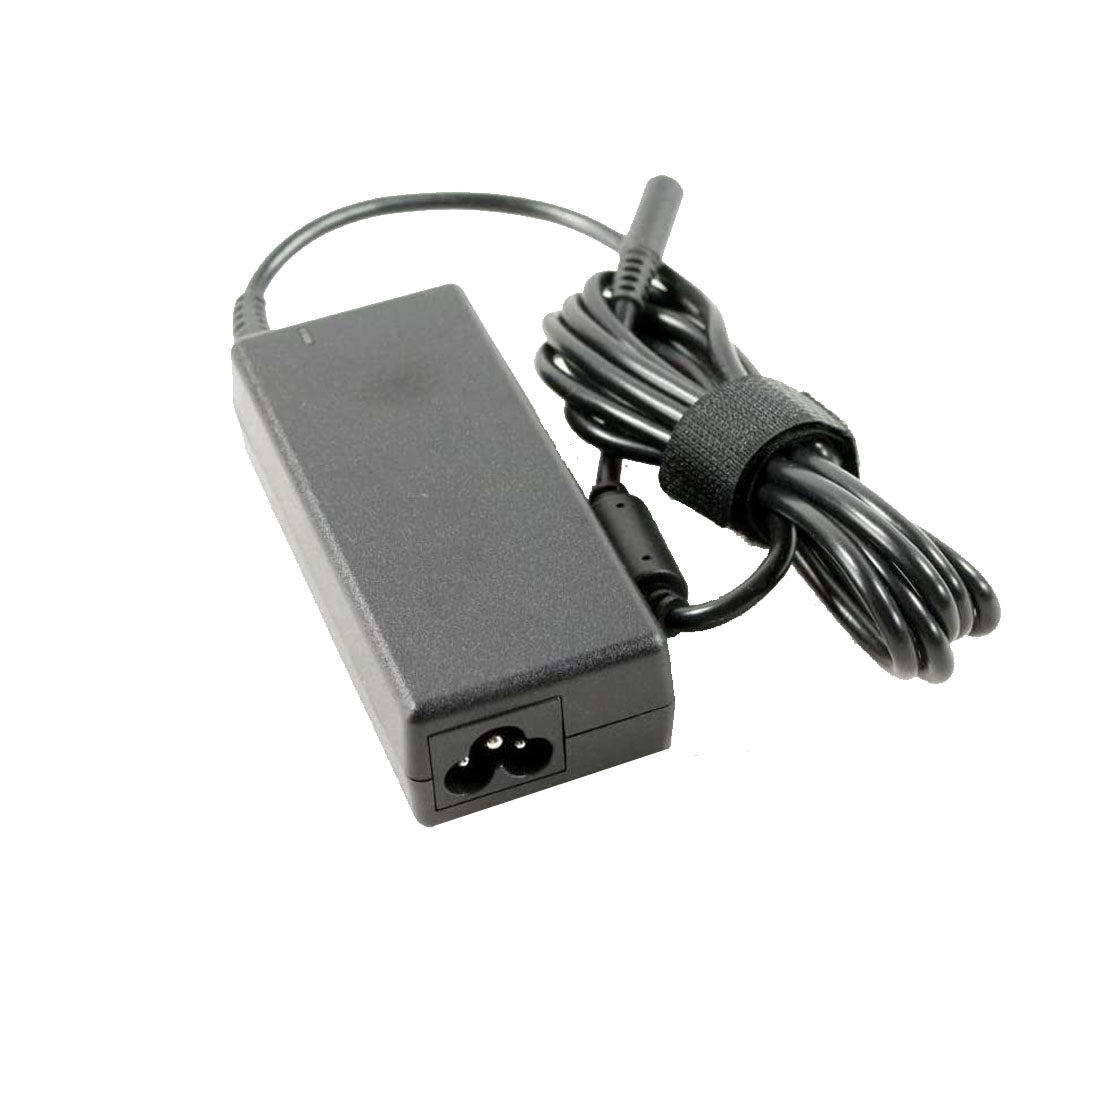 Dell Original 65W 19.5V 4.5mm Pin Laptop Charger Adapter for XPS 13 9350 With Power Cord